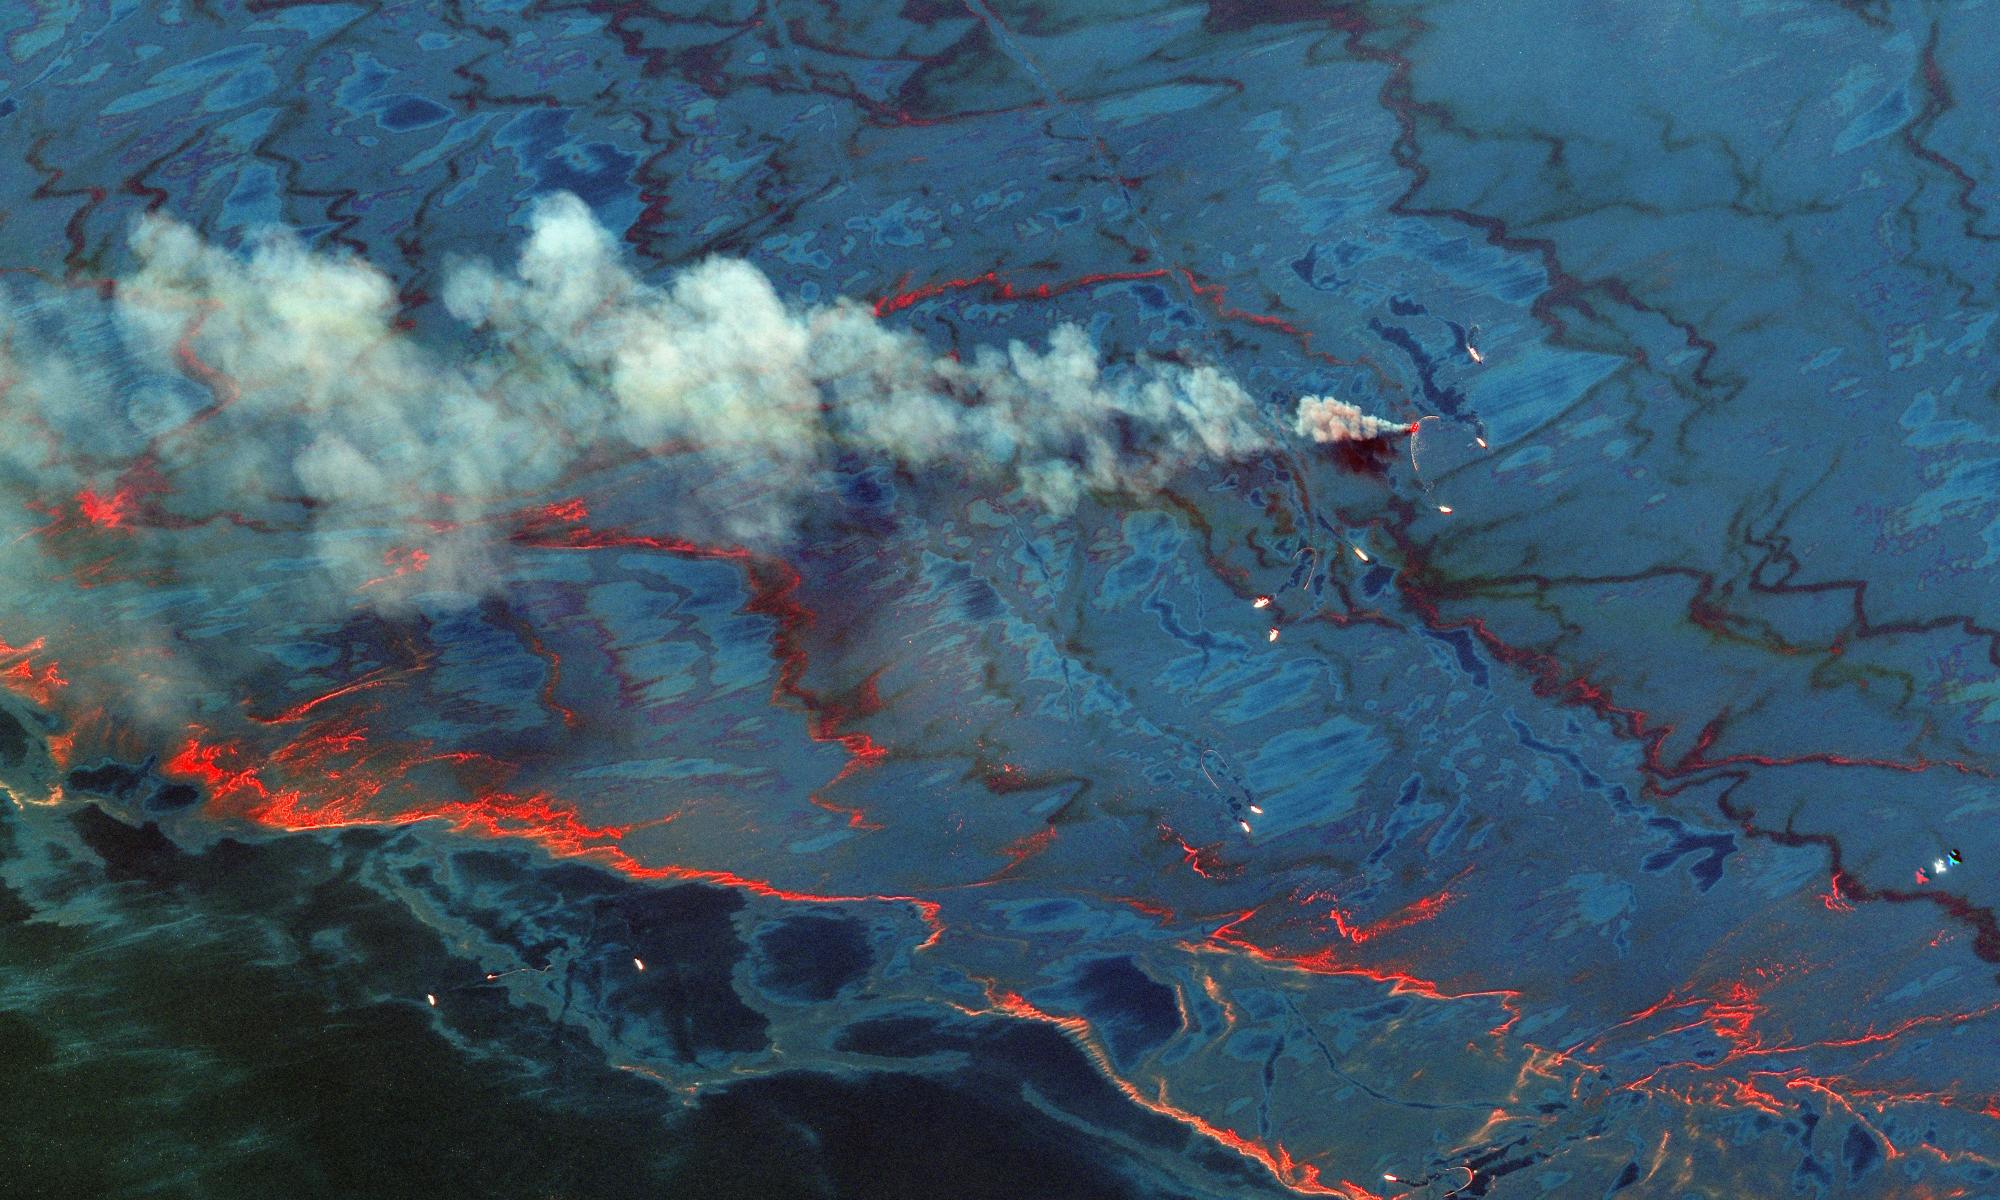 Deepwater Horizon disaster had much worse impact than believed, study finds